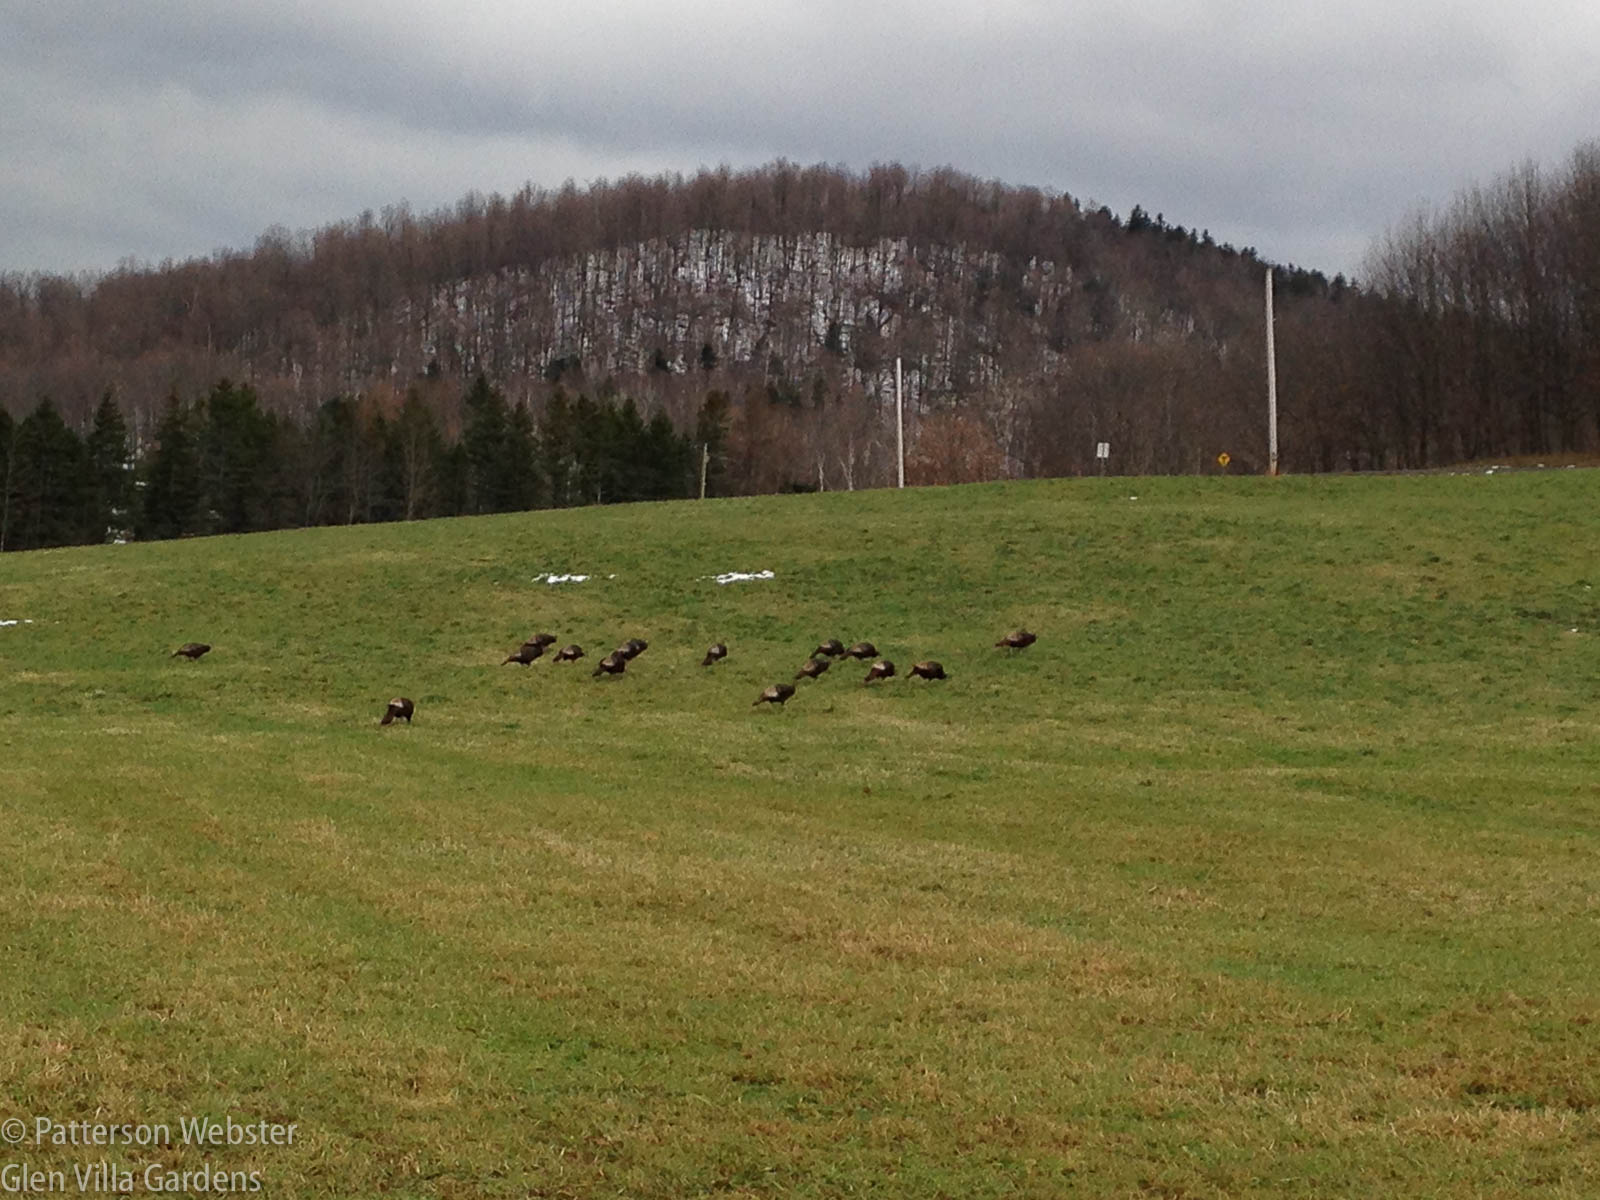 We see wild turkeys from time to time but rarely in the colder months.